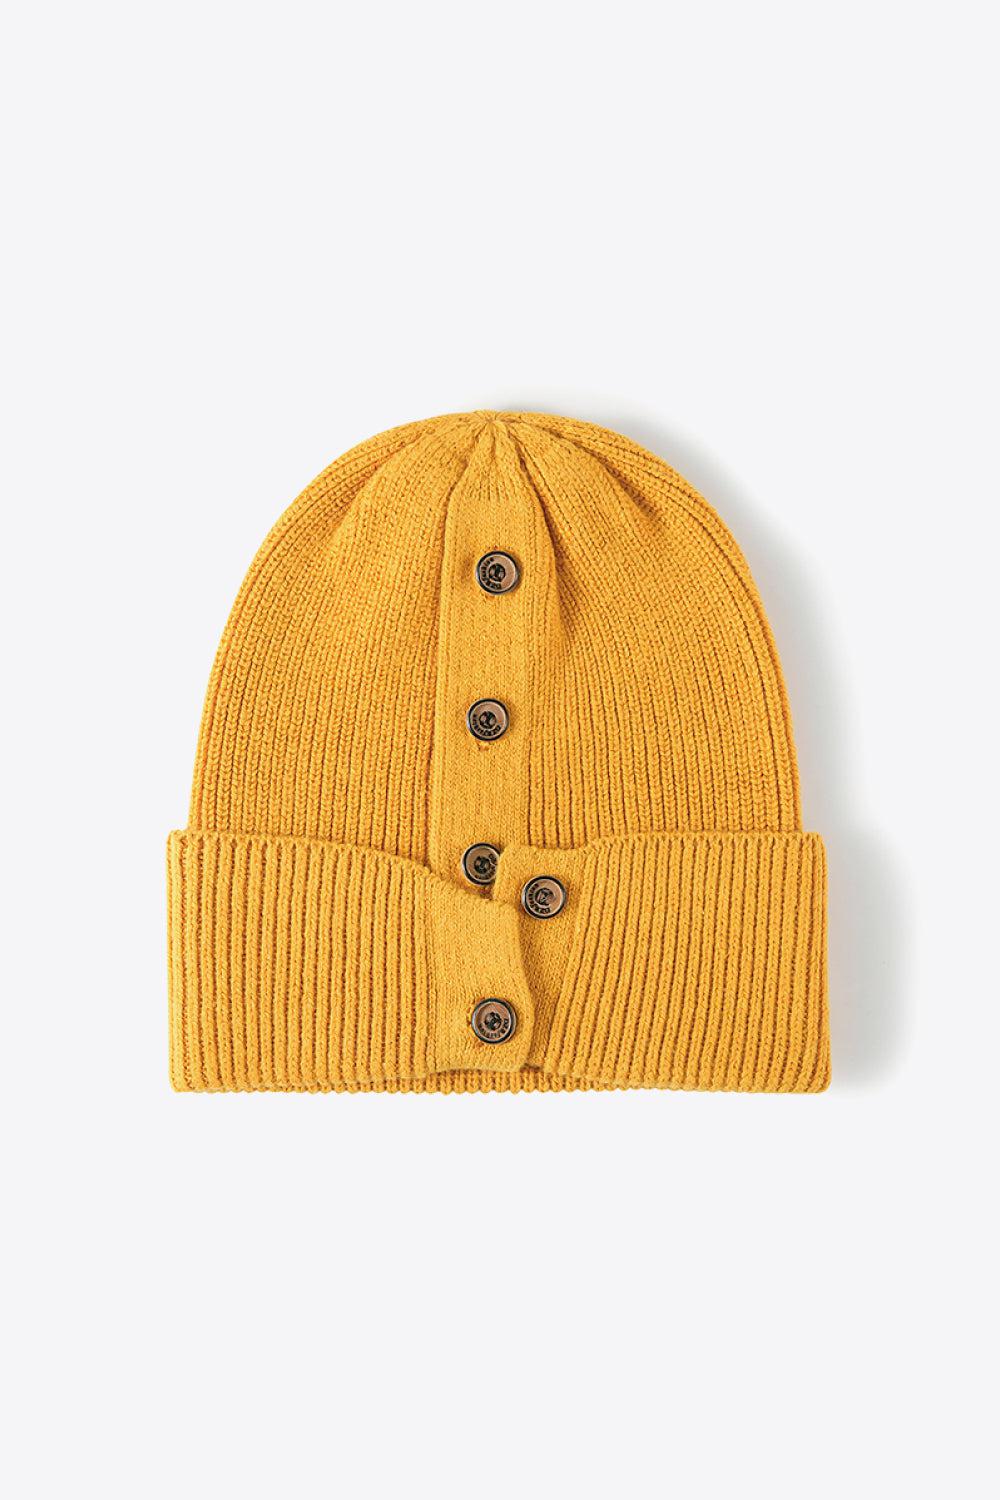 Button Detail Rib-Knit Cuff Beanie-BEANIES-[Adult]-[Female]-Mustard-One Size-2022 Online Blue Zone Planet